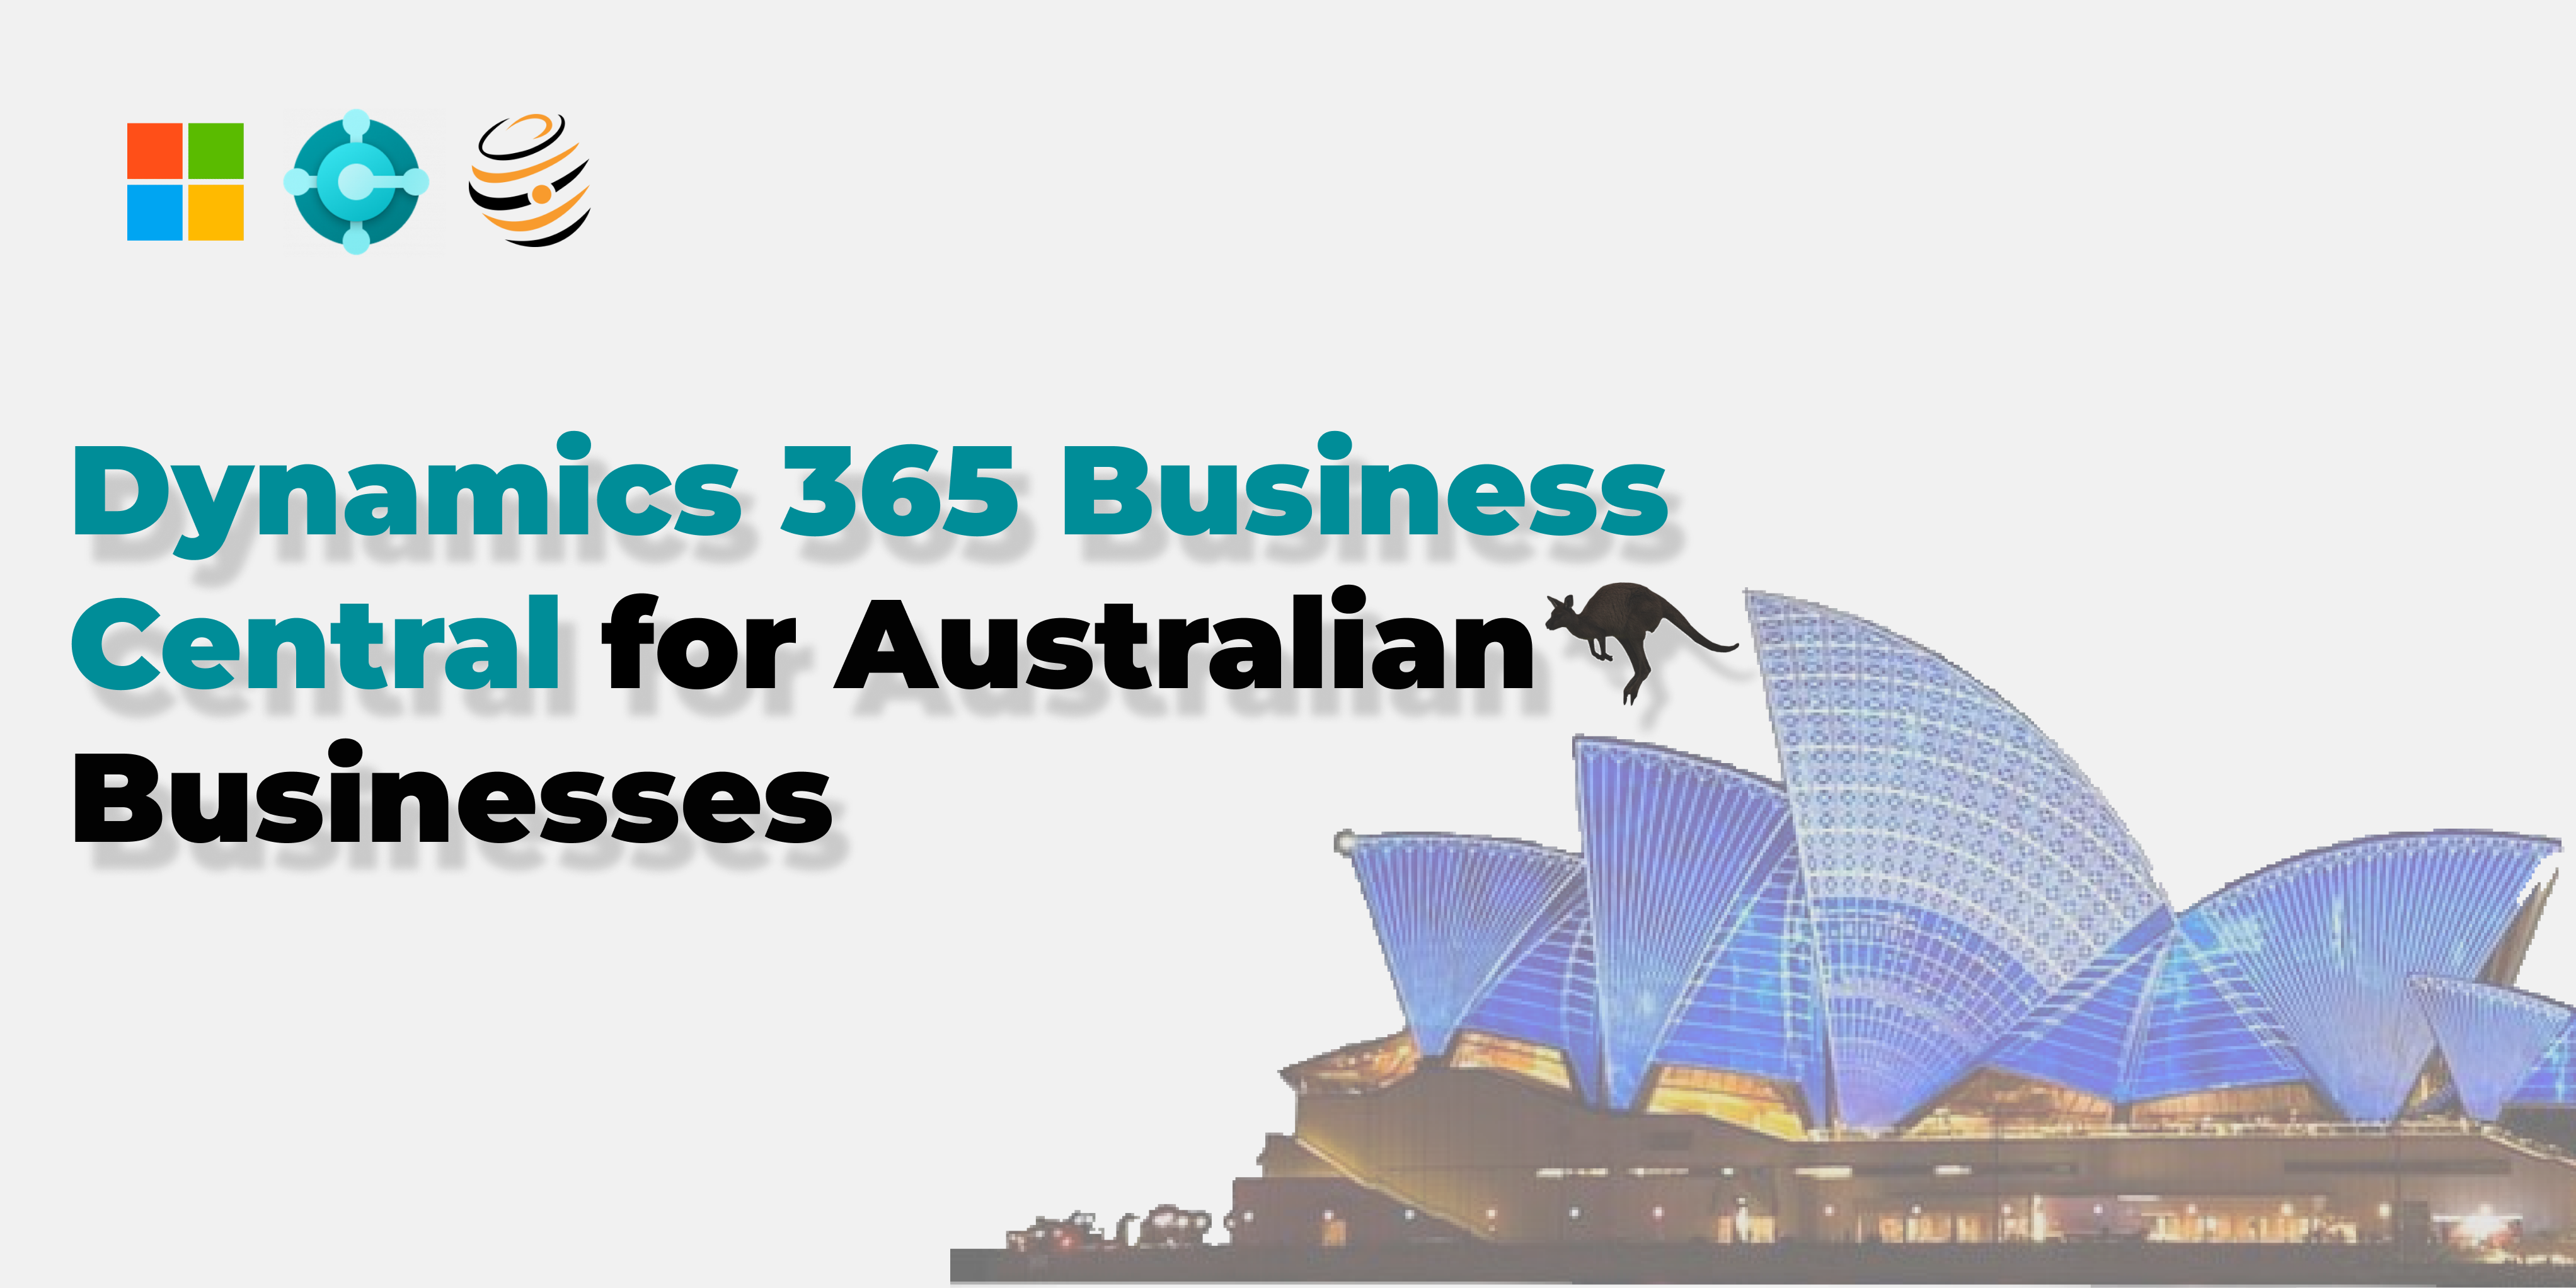 Microsoft Dynamics 365 Business Central for Australian Businesses